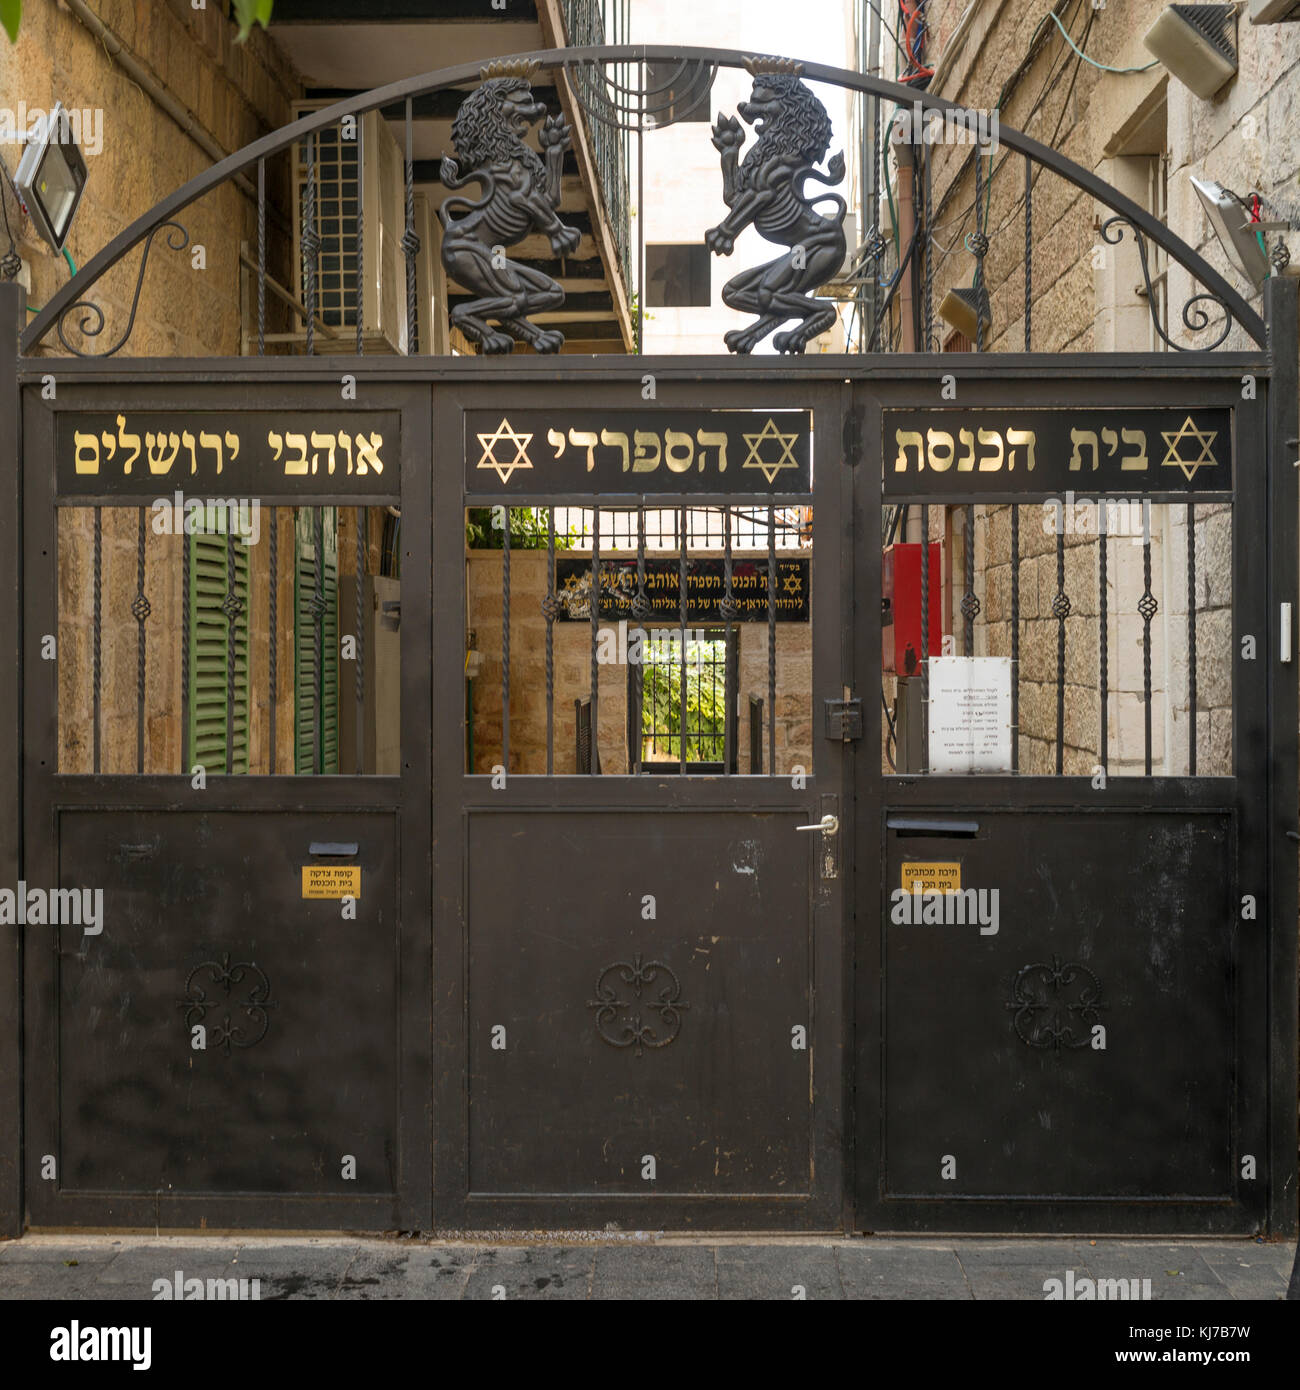 Closed gate of building in old city, Israel, Jerusalem Stock Photo